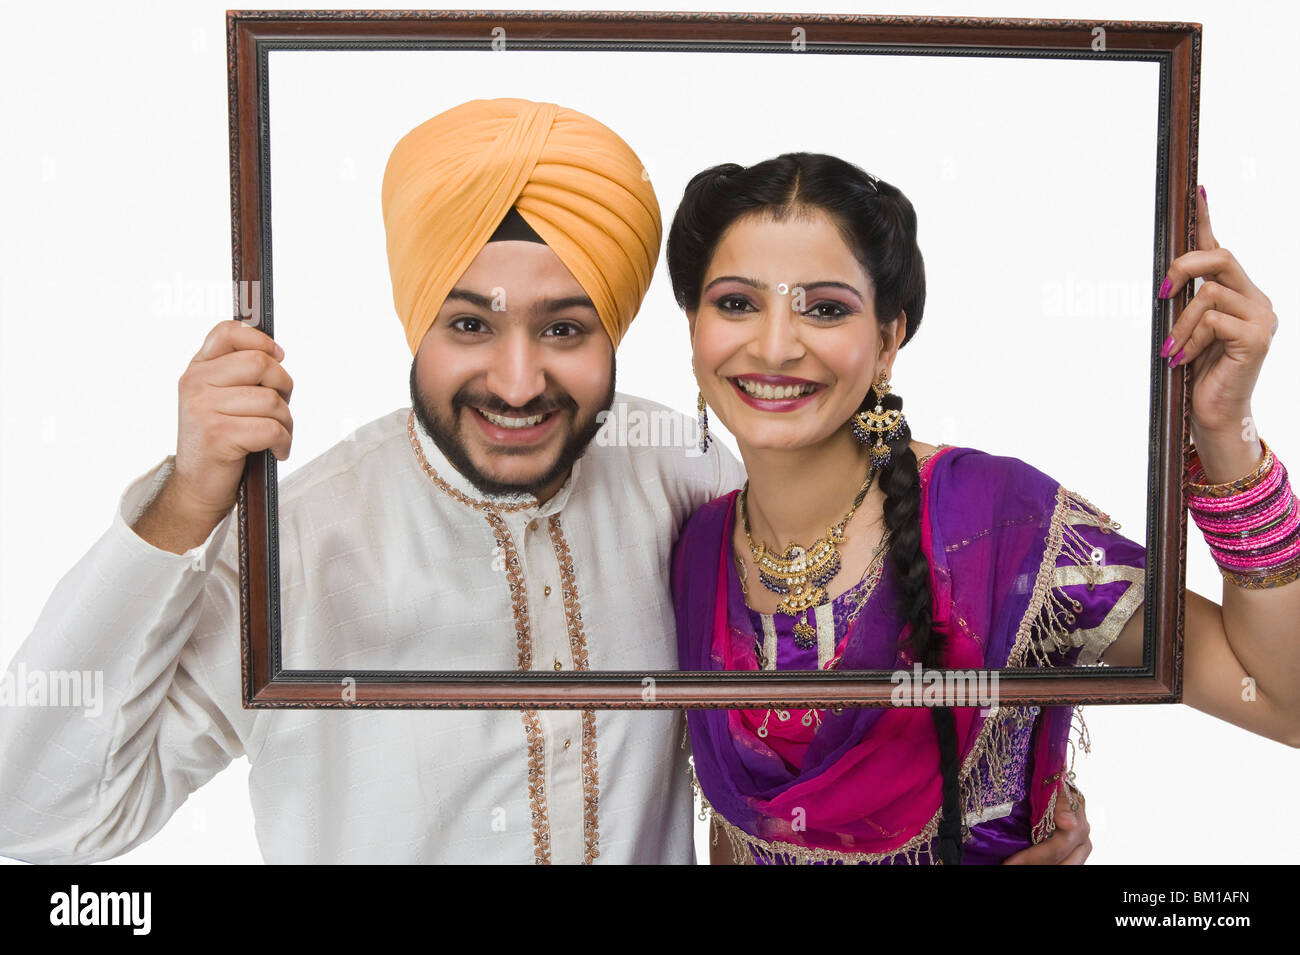 Portrait of a Sikh couple holding a picture frame and smiling Stock Photo